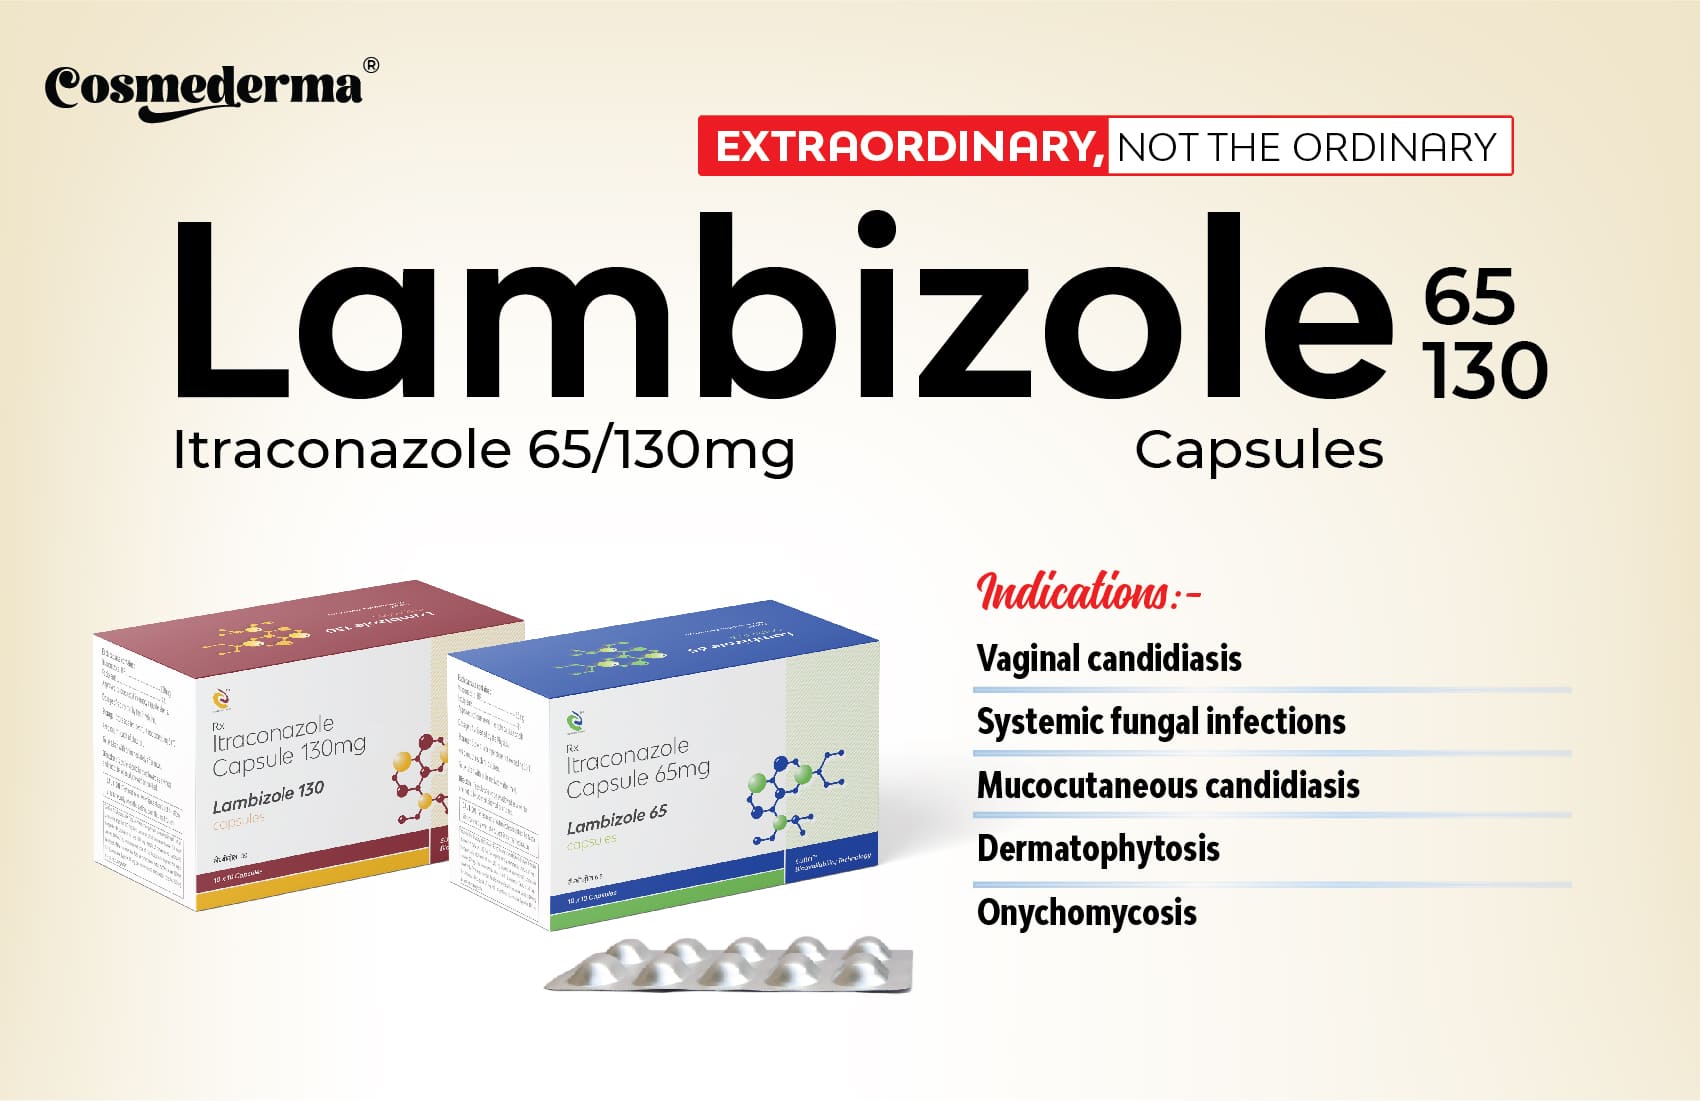 Top 10 Itraconazole Capsules in India